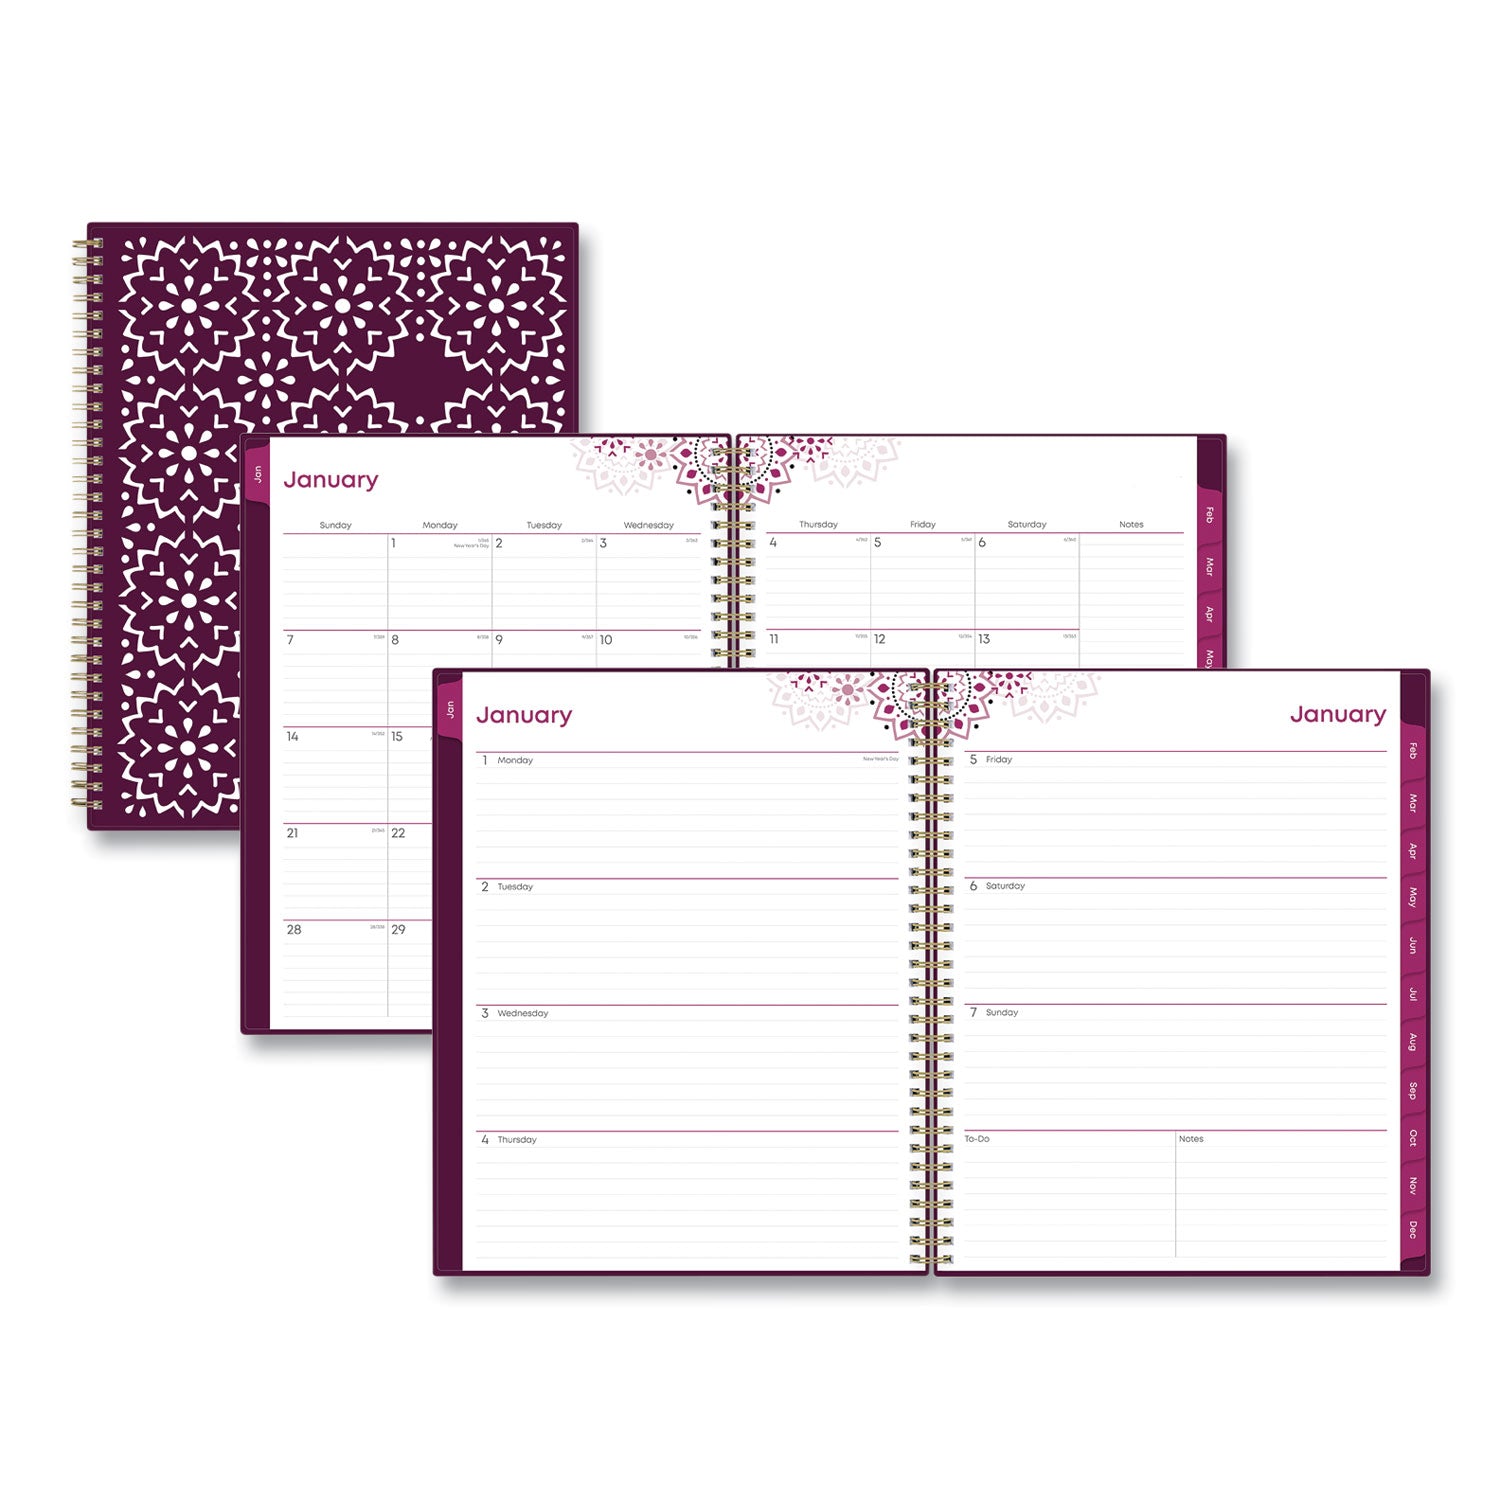 gili-weekly-monthly-planner-gili-jewel-tone-artwork-11-x-85-plum-cover-12-month-jan-to-dec-2024_bls117889 - 1